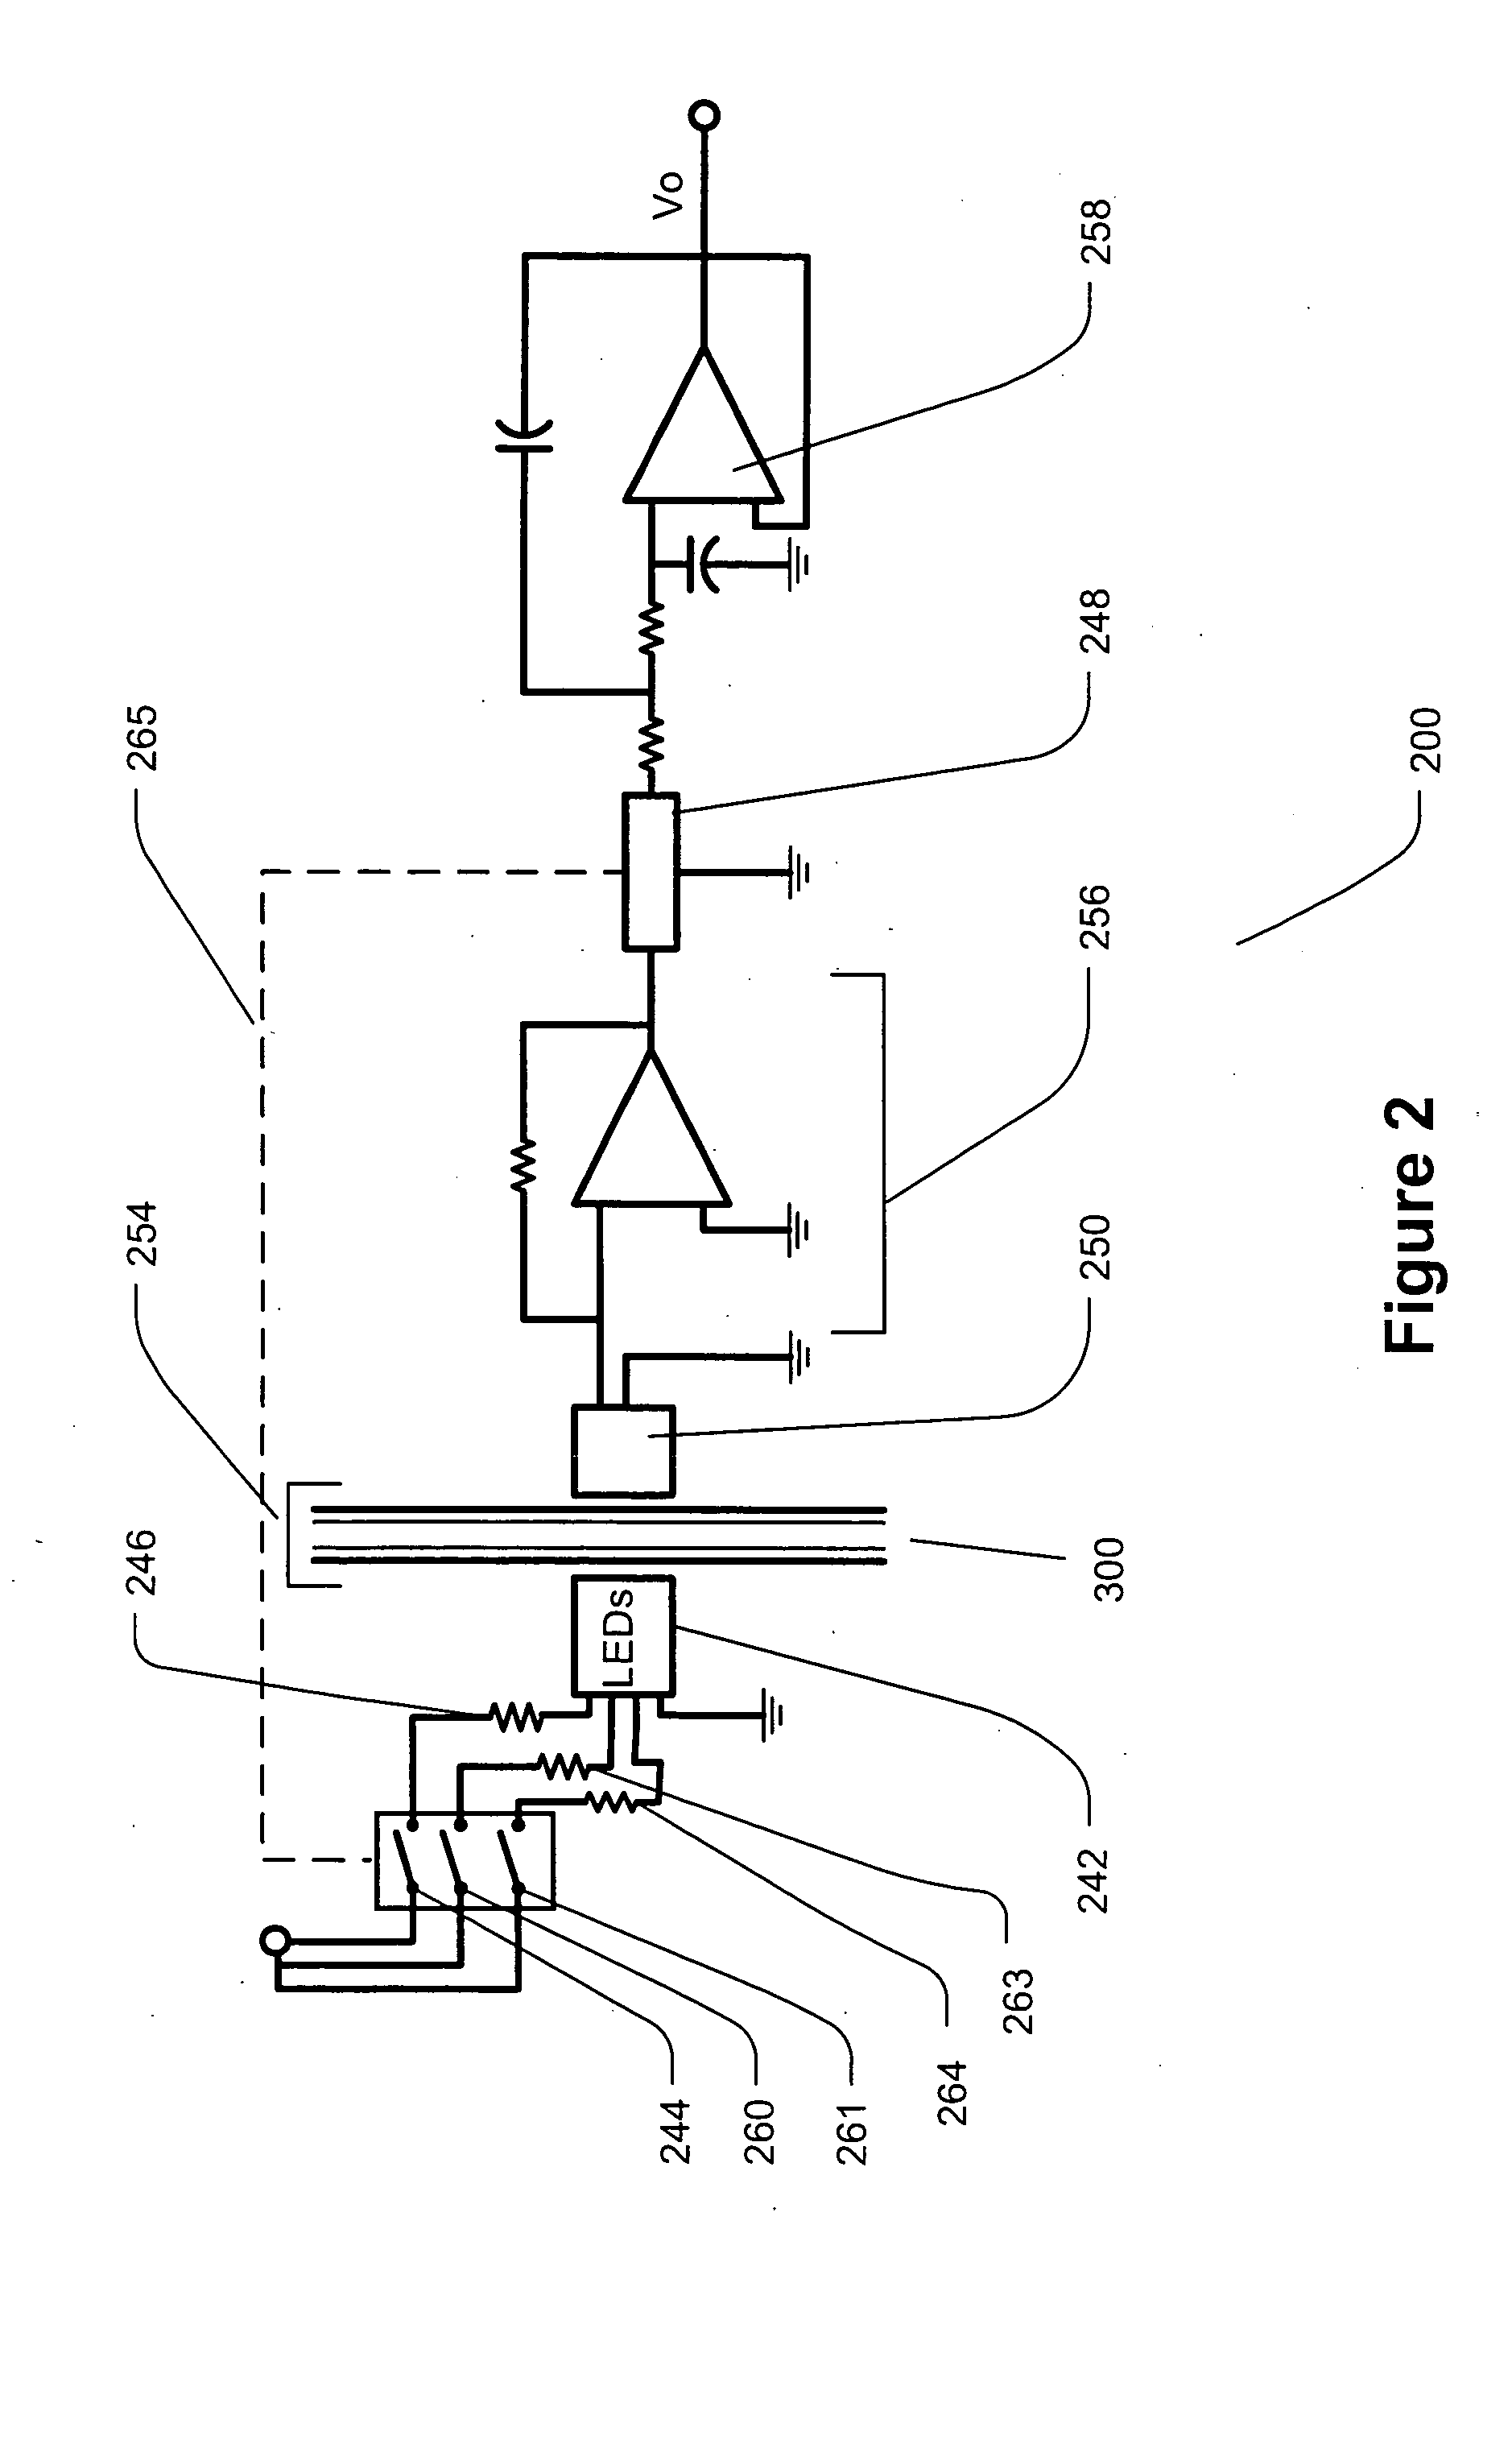 Cuvette apparatus and system for measuring optical properties of a liquid such as blood